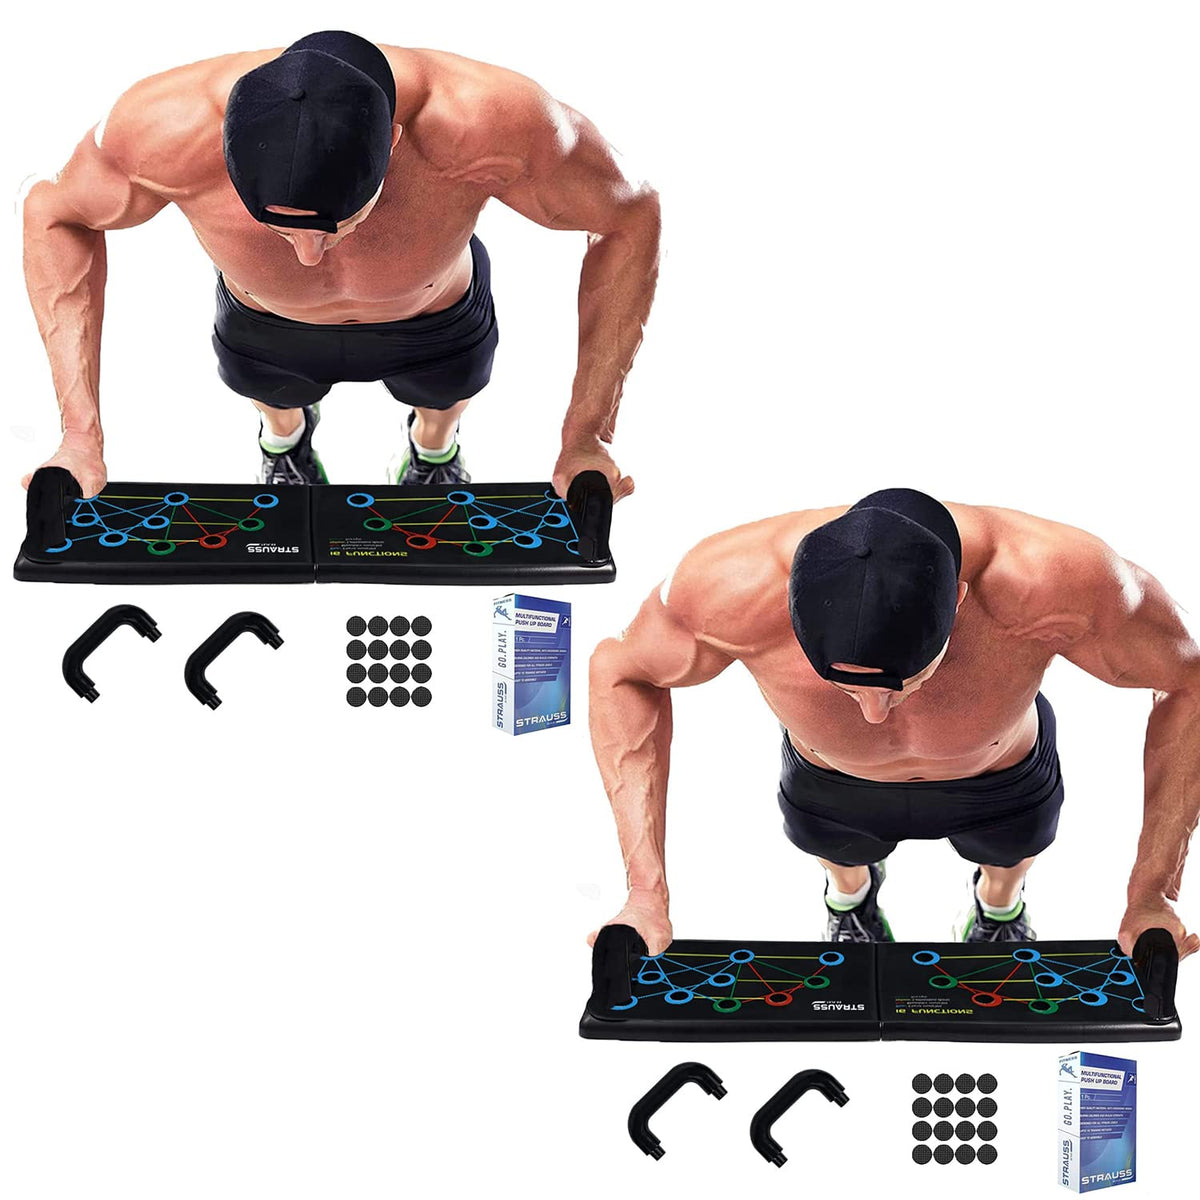 Multifunctional Push Up Board|Pushup Bar|Pushup Stand for Chest Press(Pack of 2)